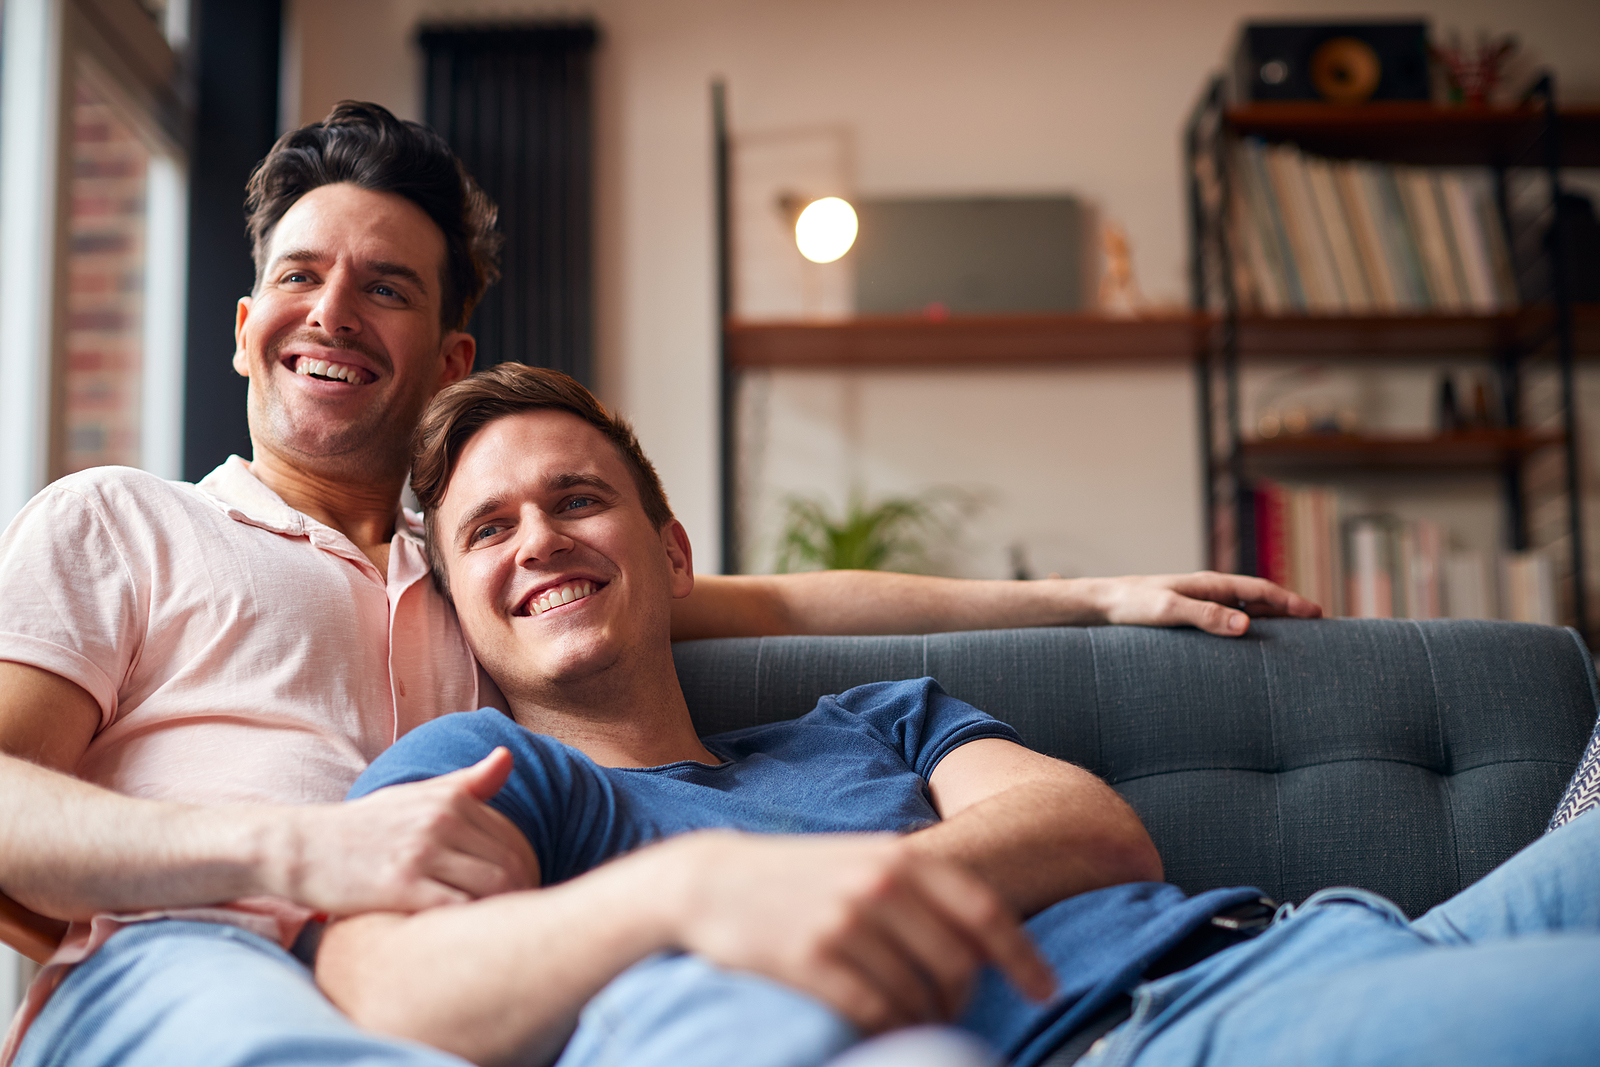 An attractive gay couple is cuddling on the couch together smiling watching tv.